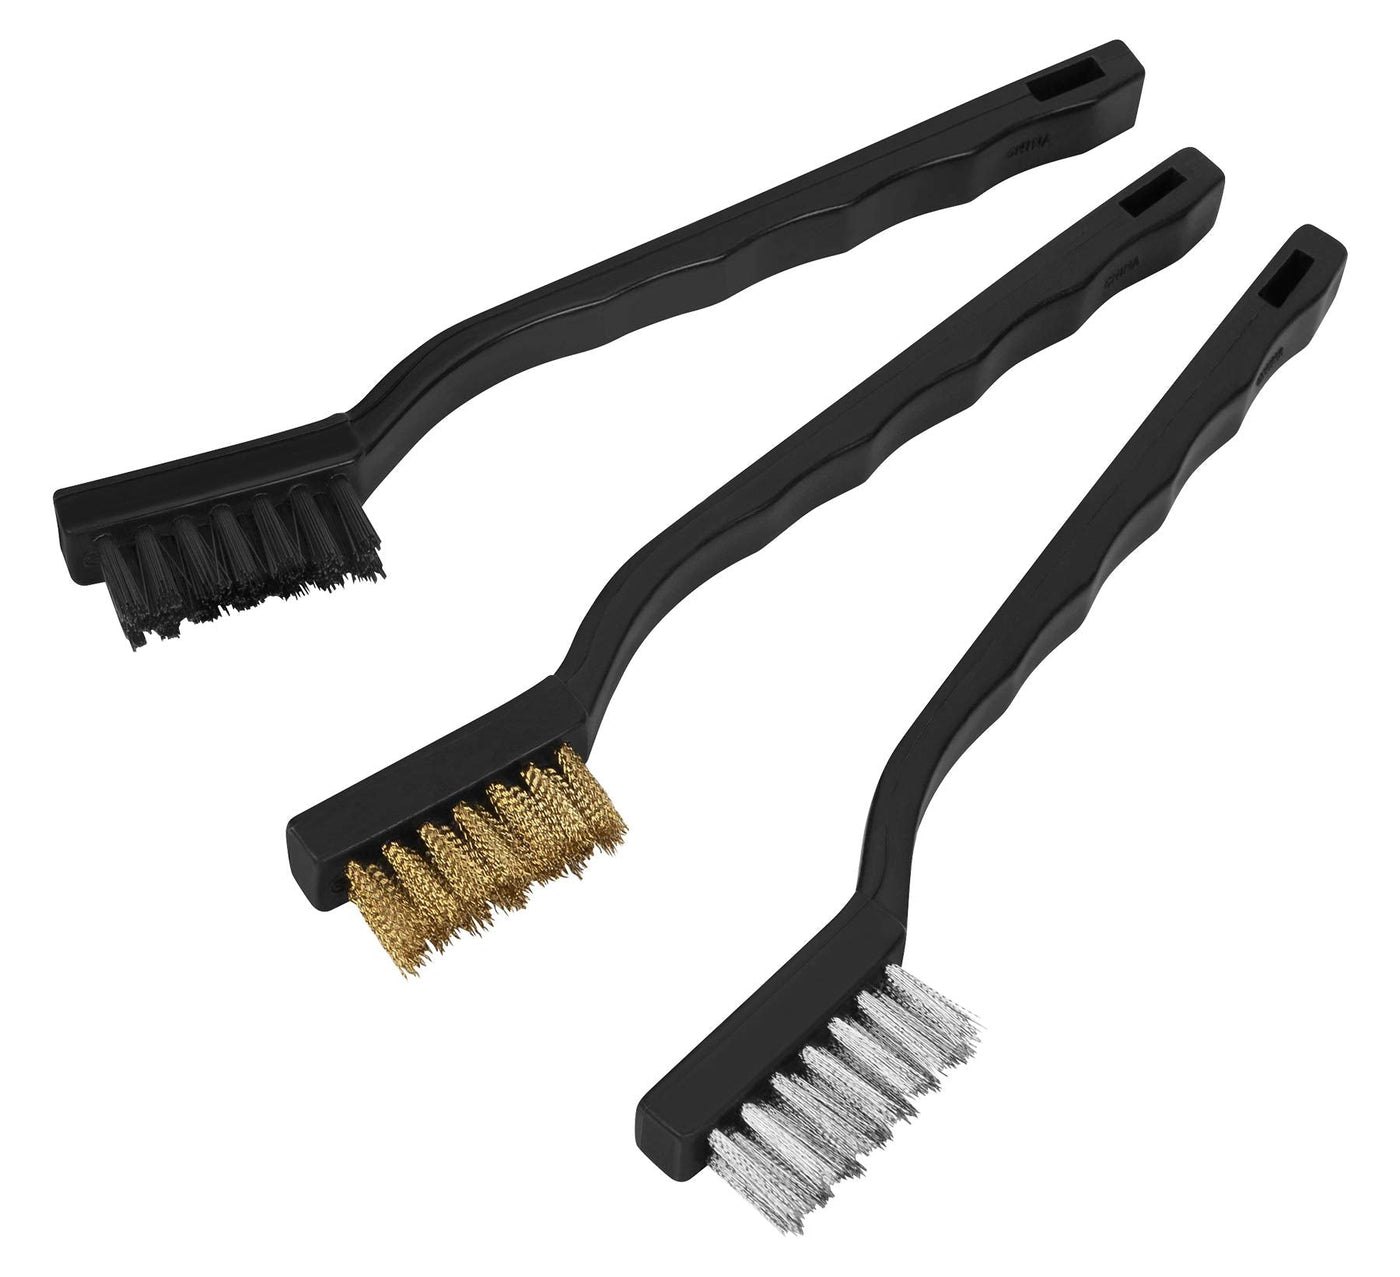 Patelai 6 Pieces Wire Brush Set Nylon Brass Stainless Steel Brushes for  Cleaning with Curved Handle